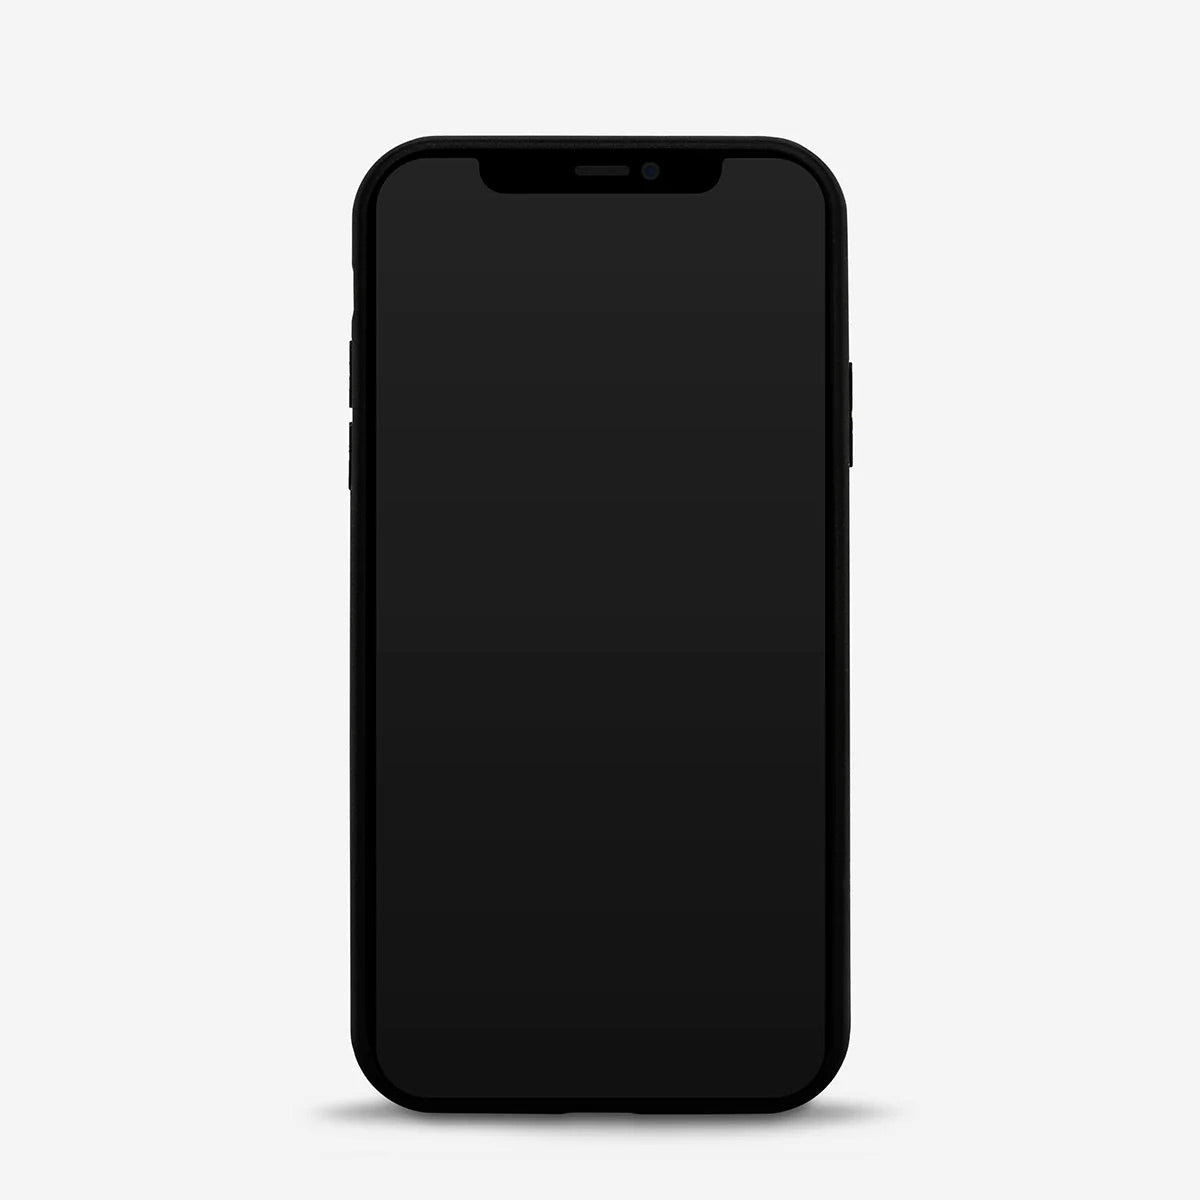 Who's who phone case - black